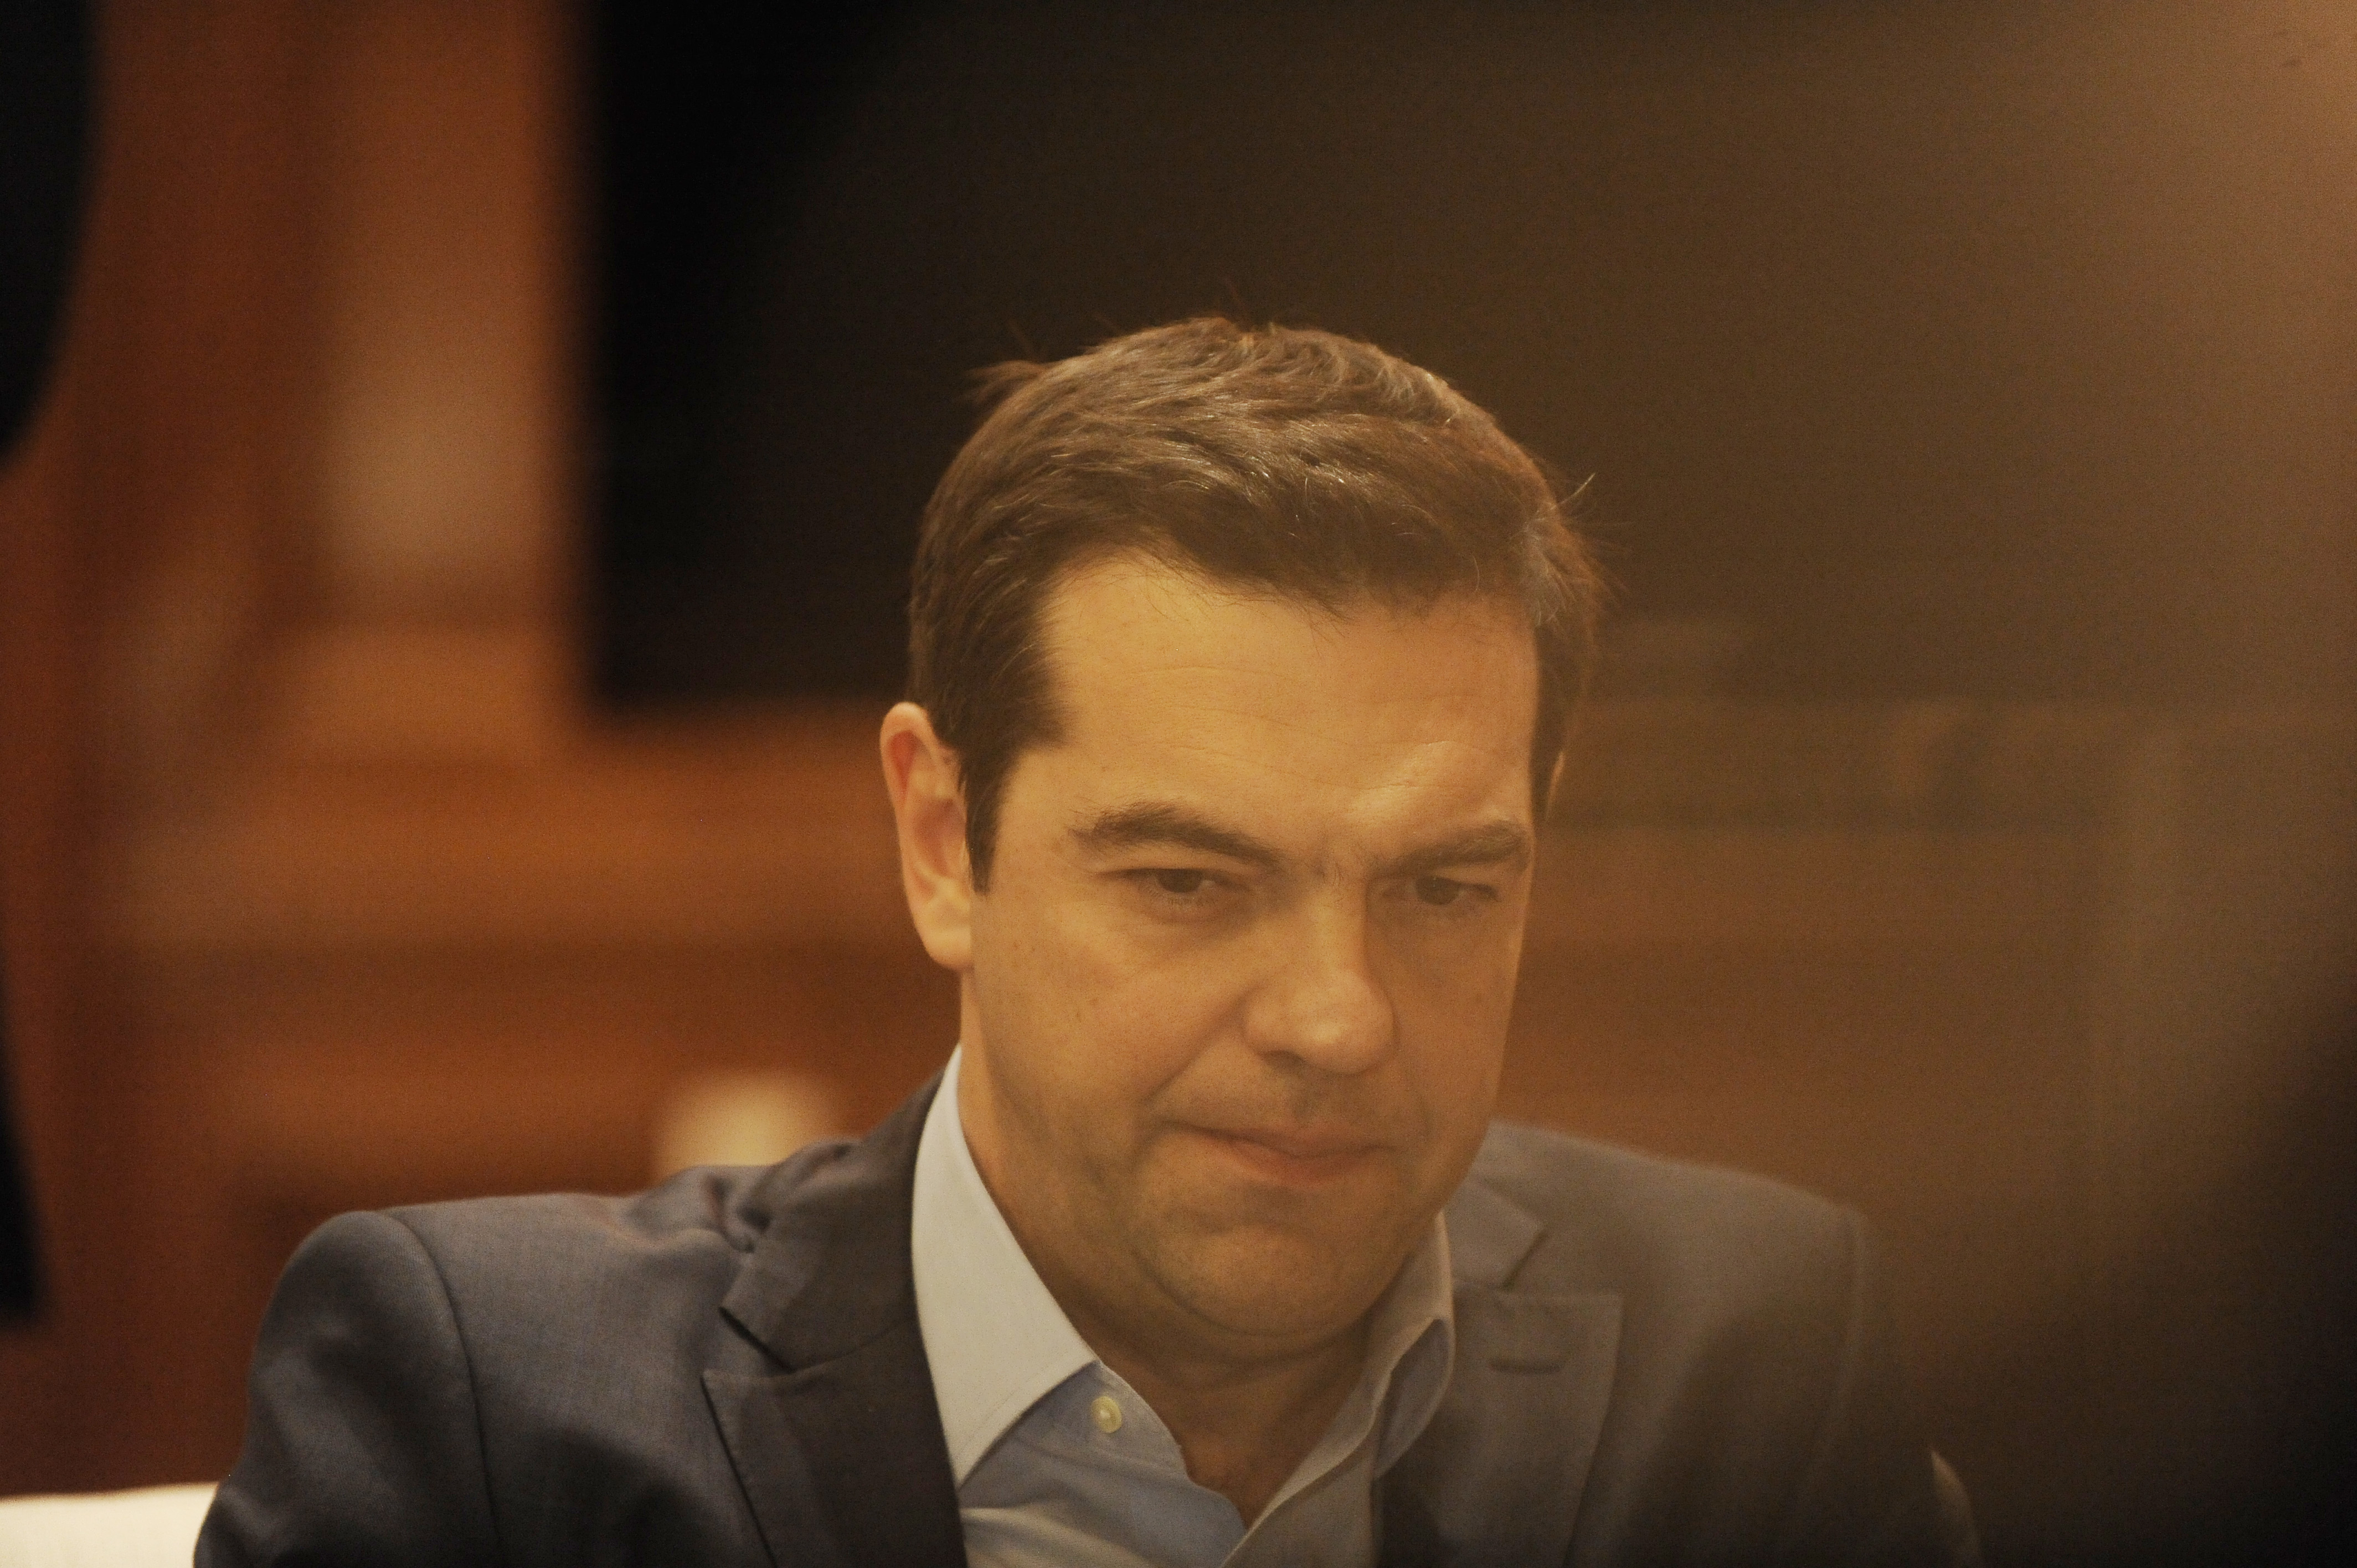 Tsipras fell into his own trap